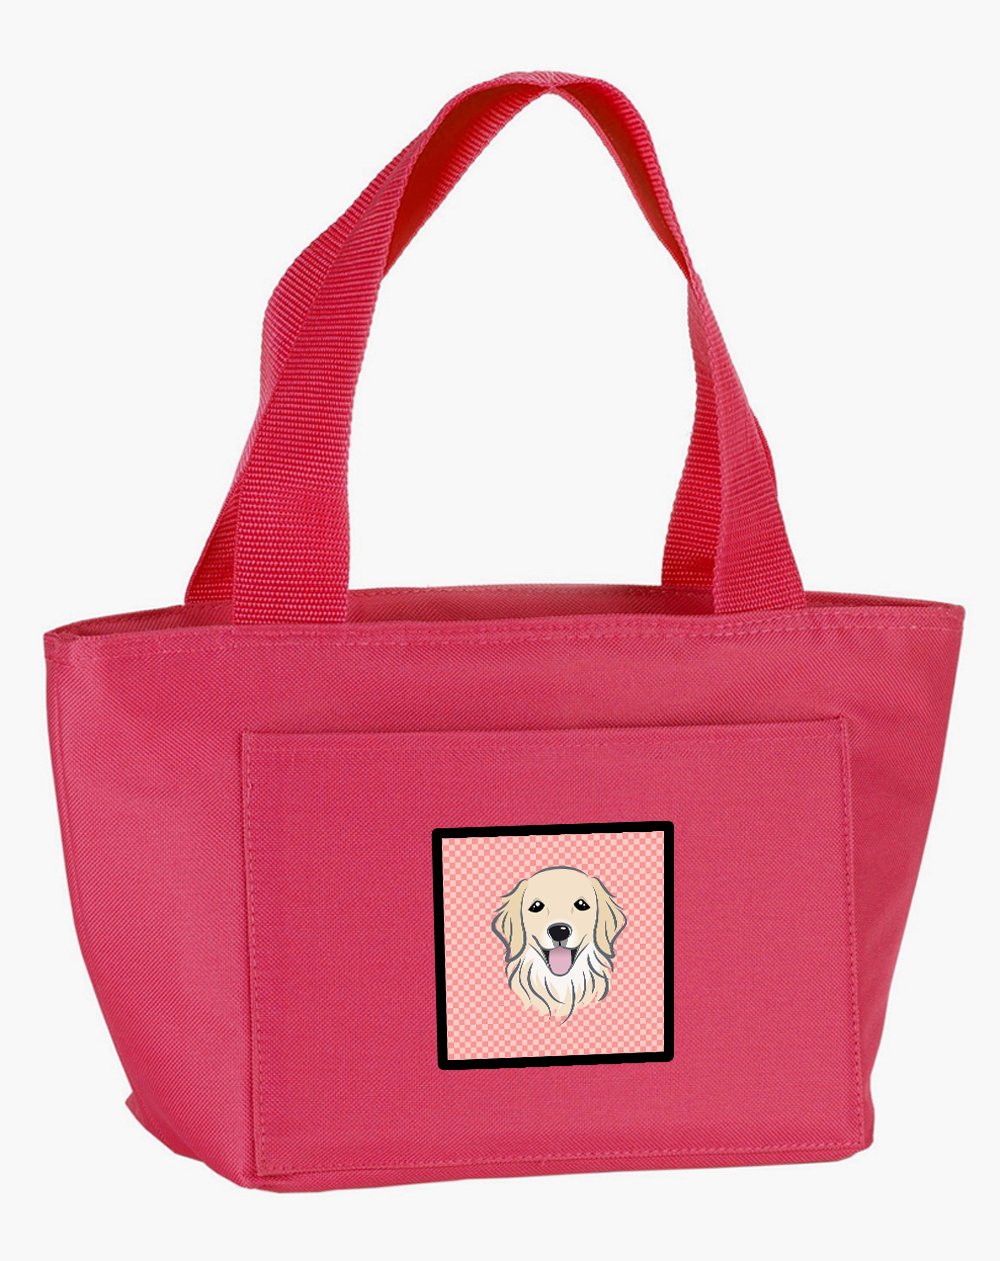 Caroline's Treasures BB1205PK-8808 Checkerboard Pink Golden Retriever Lunch Bag Insulated Lunch Box Tote Bag for Women Adult Men, Reusable, Large, Pink